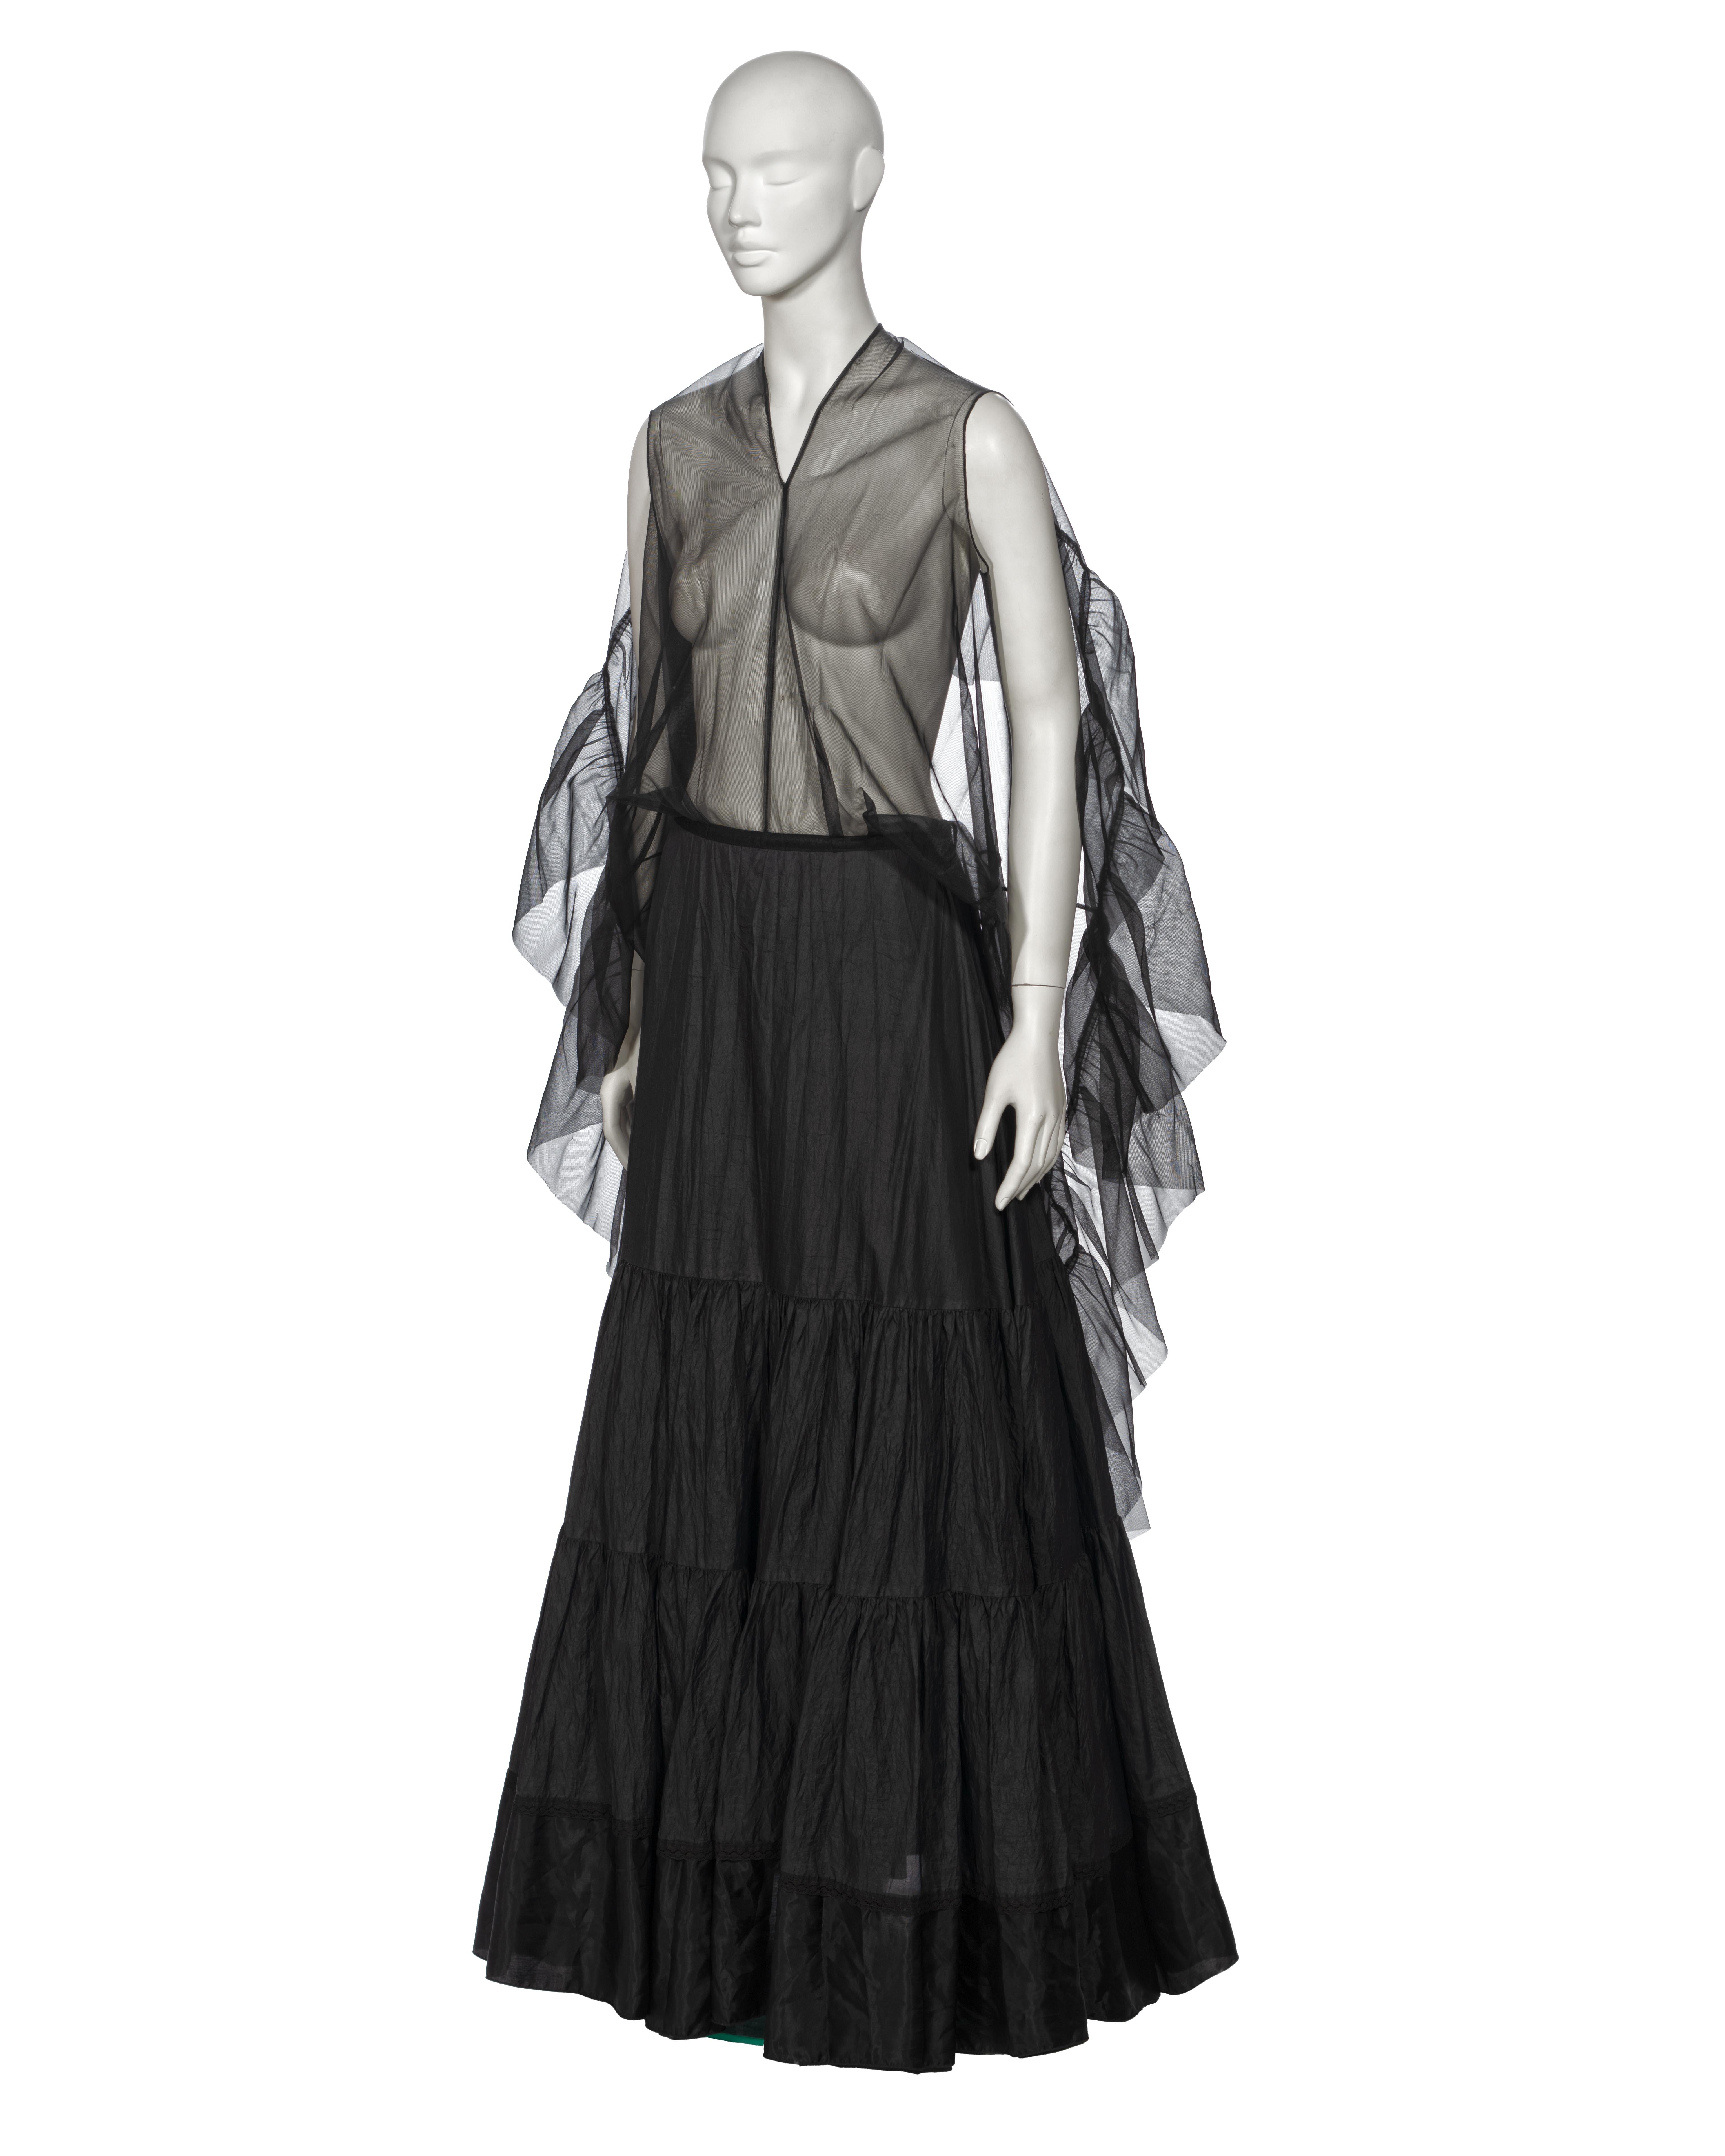 Martin Margiela Artisanal Evening Dress Made Out Of Vintage Petticoats, ss 2003 For Sale 8